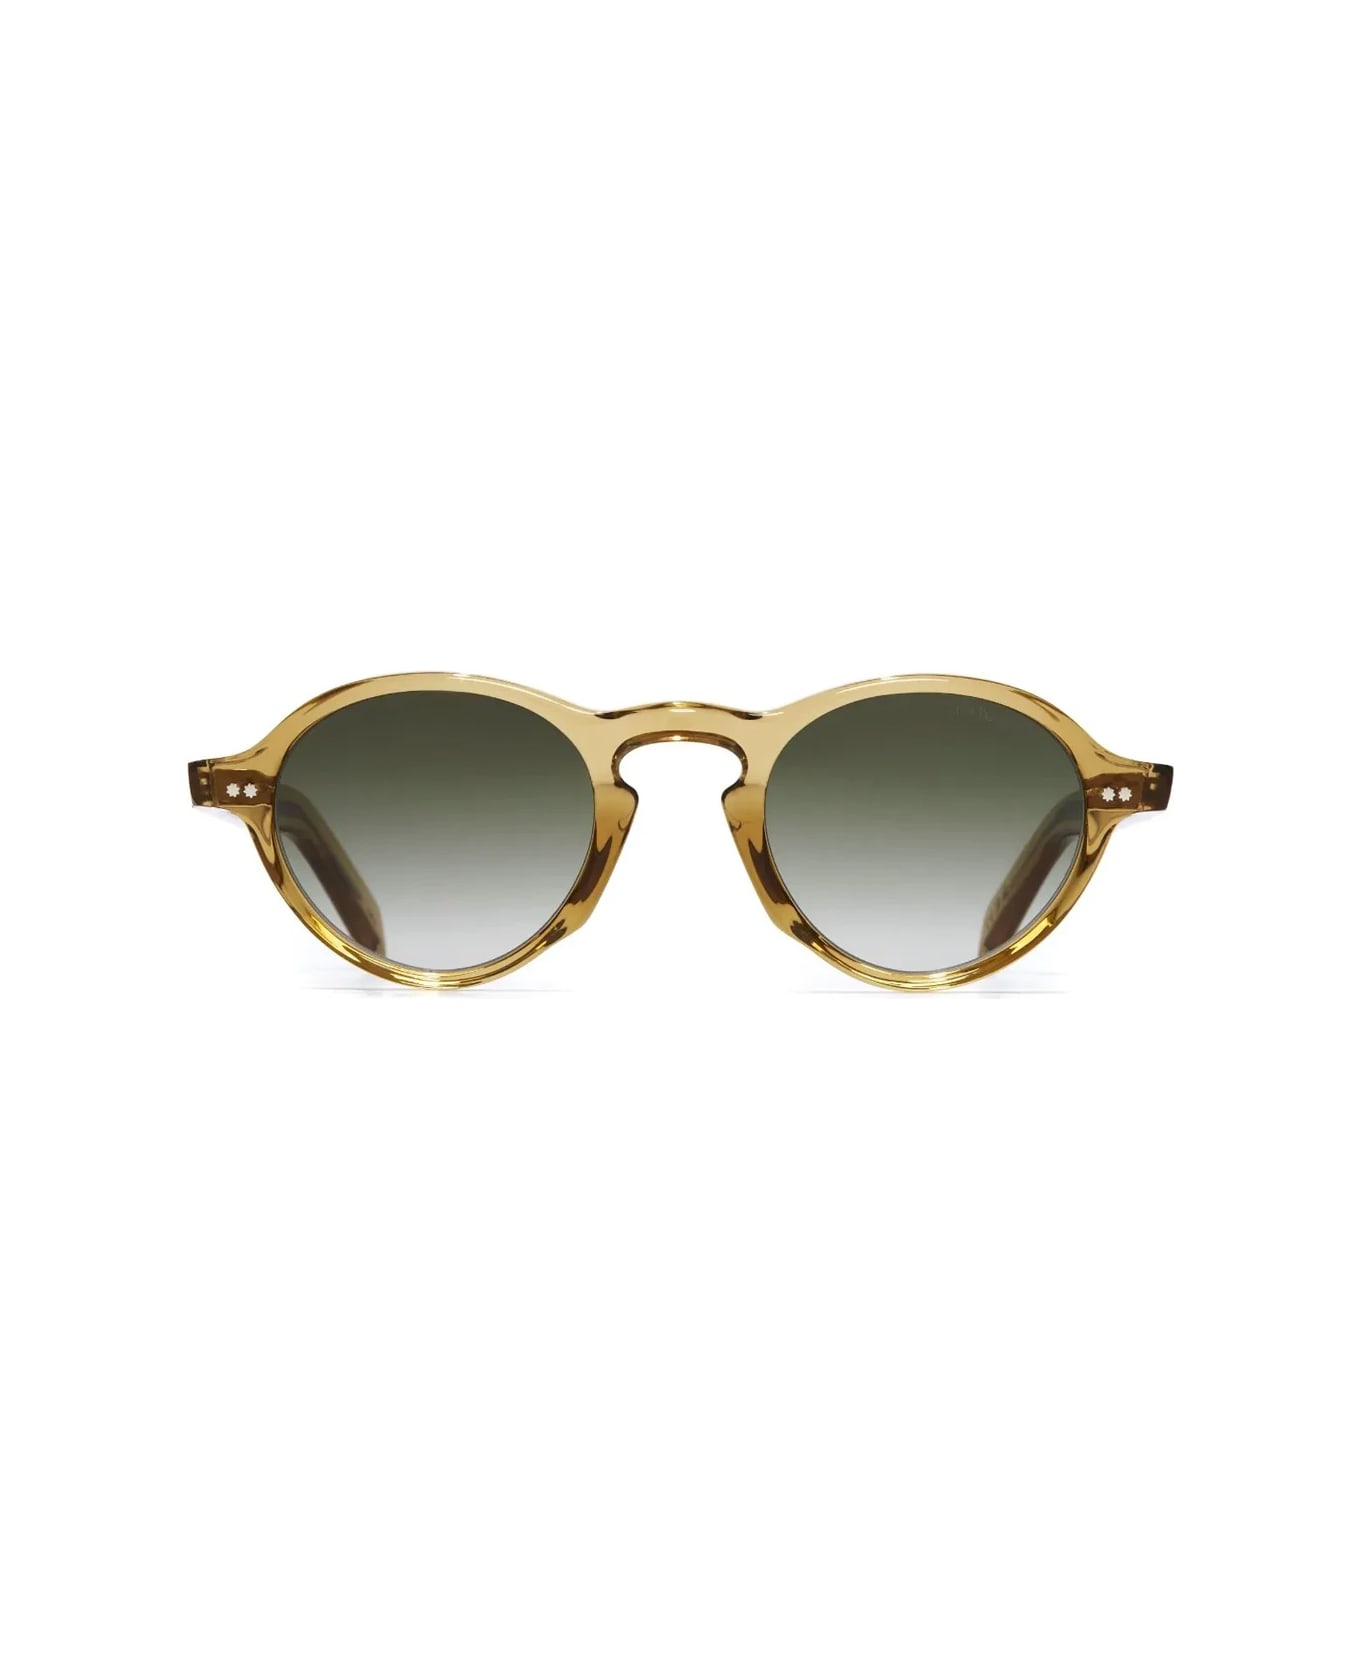 Cutler and Gross Gr08 04 Crystal Tobacco Sunglasses - Verde サングラス